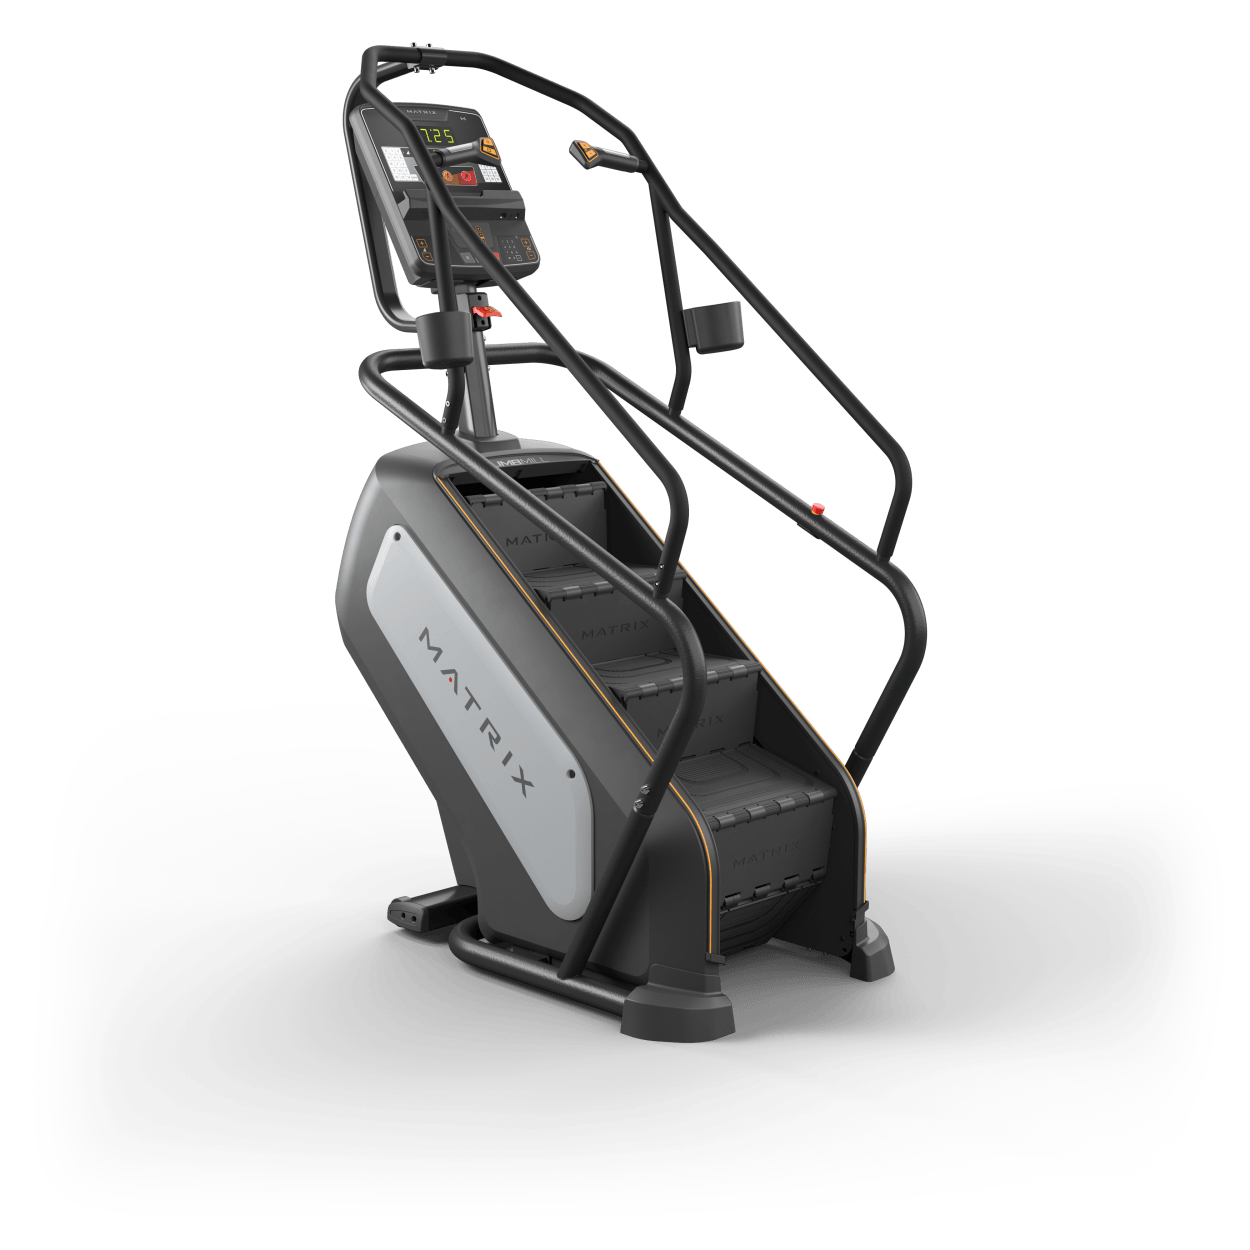 Matrix Fitness Endurance Climbmill with Group Training LED Console full view | Fitness Experience